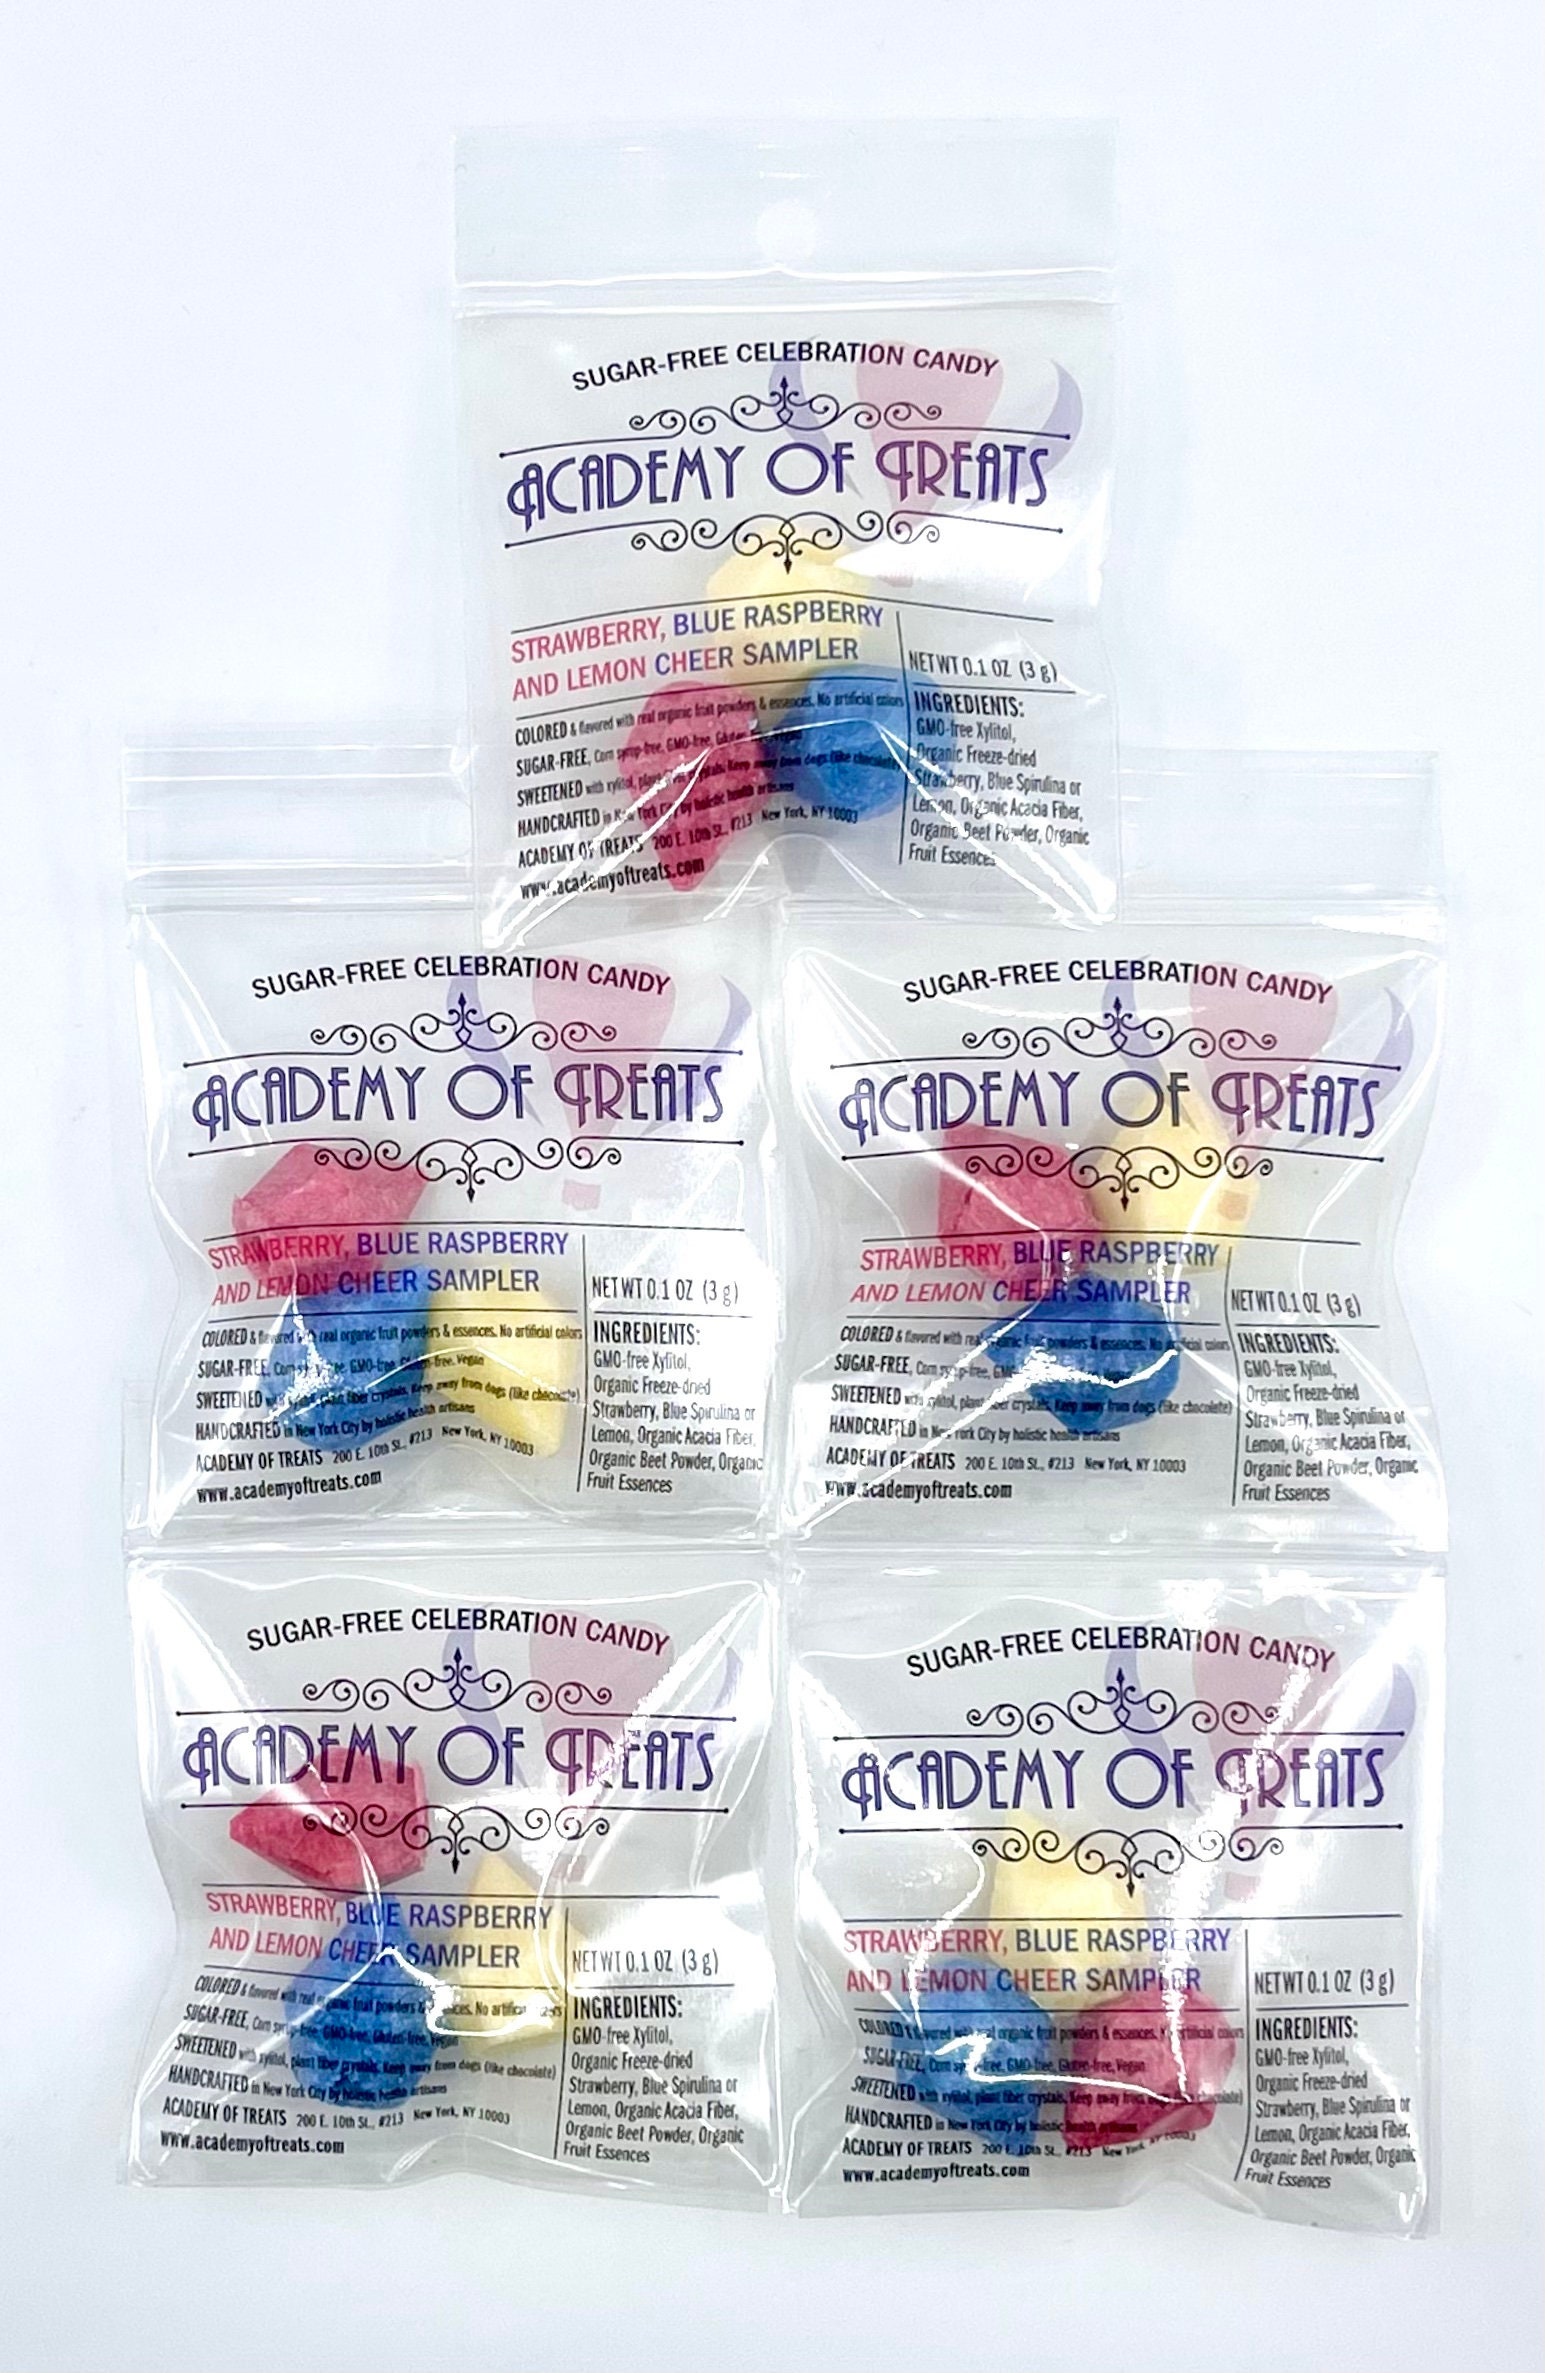 SUGARFREE CHEER SAMPLER: Colorful Kids Candy Jewels With Blue Raspberry,  Strawberry and Lemon Flavors. Delicious Gift or Treat 